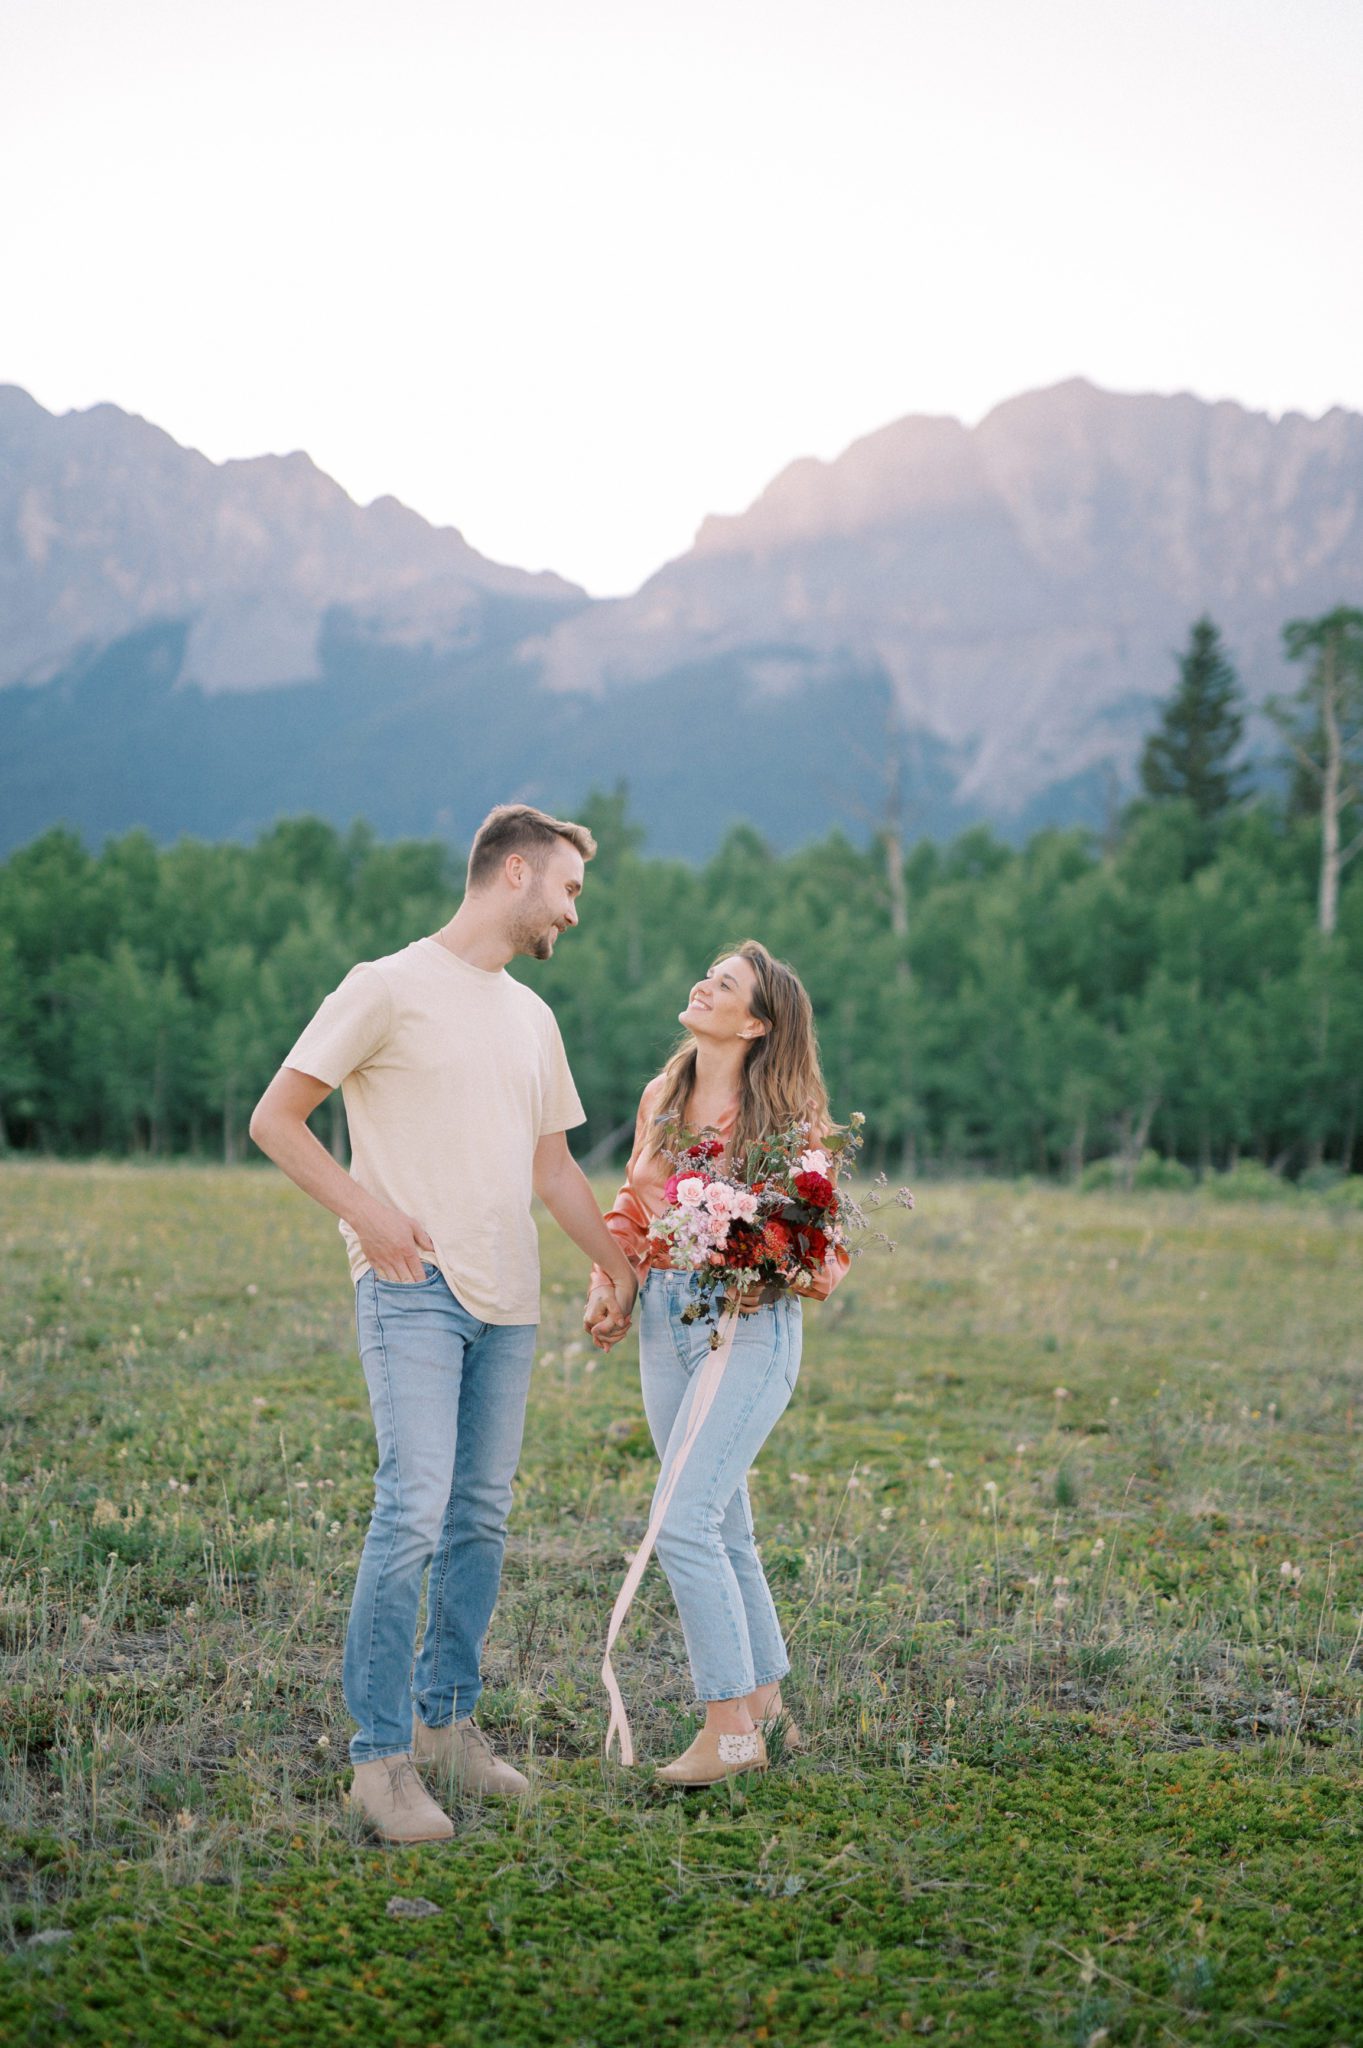 Couples session outfit inspiration for your photography shoot